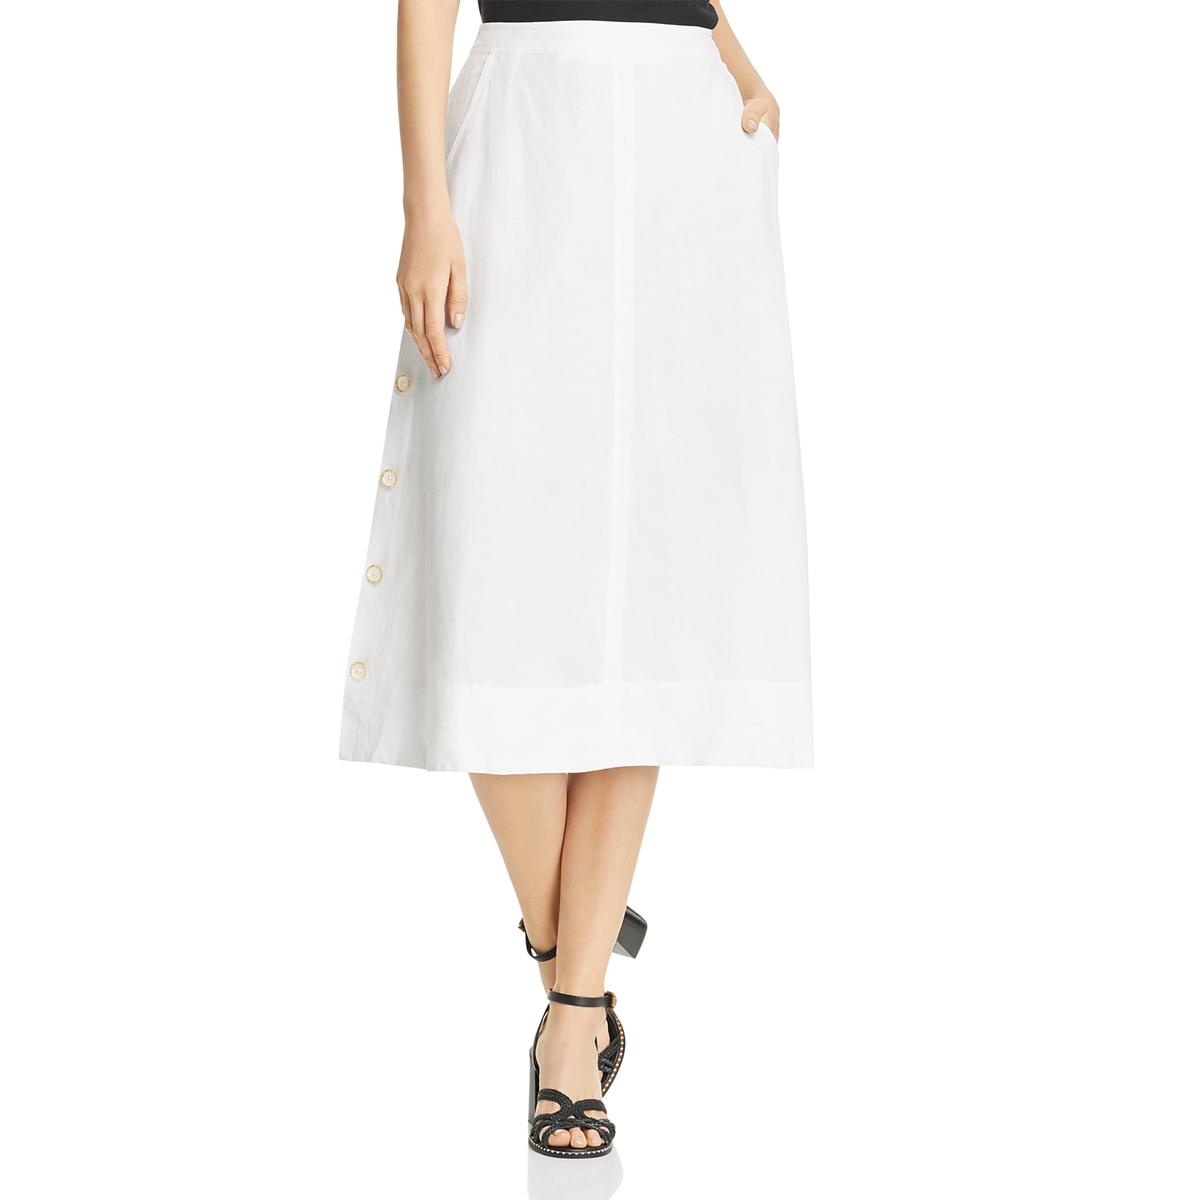 Women's Skirts: Ankle And Floor - Kmart